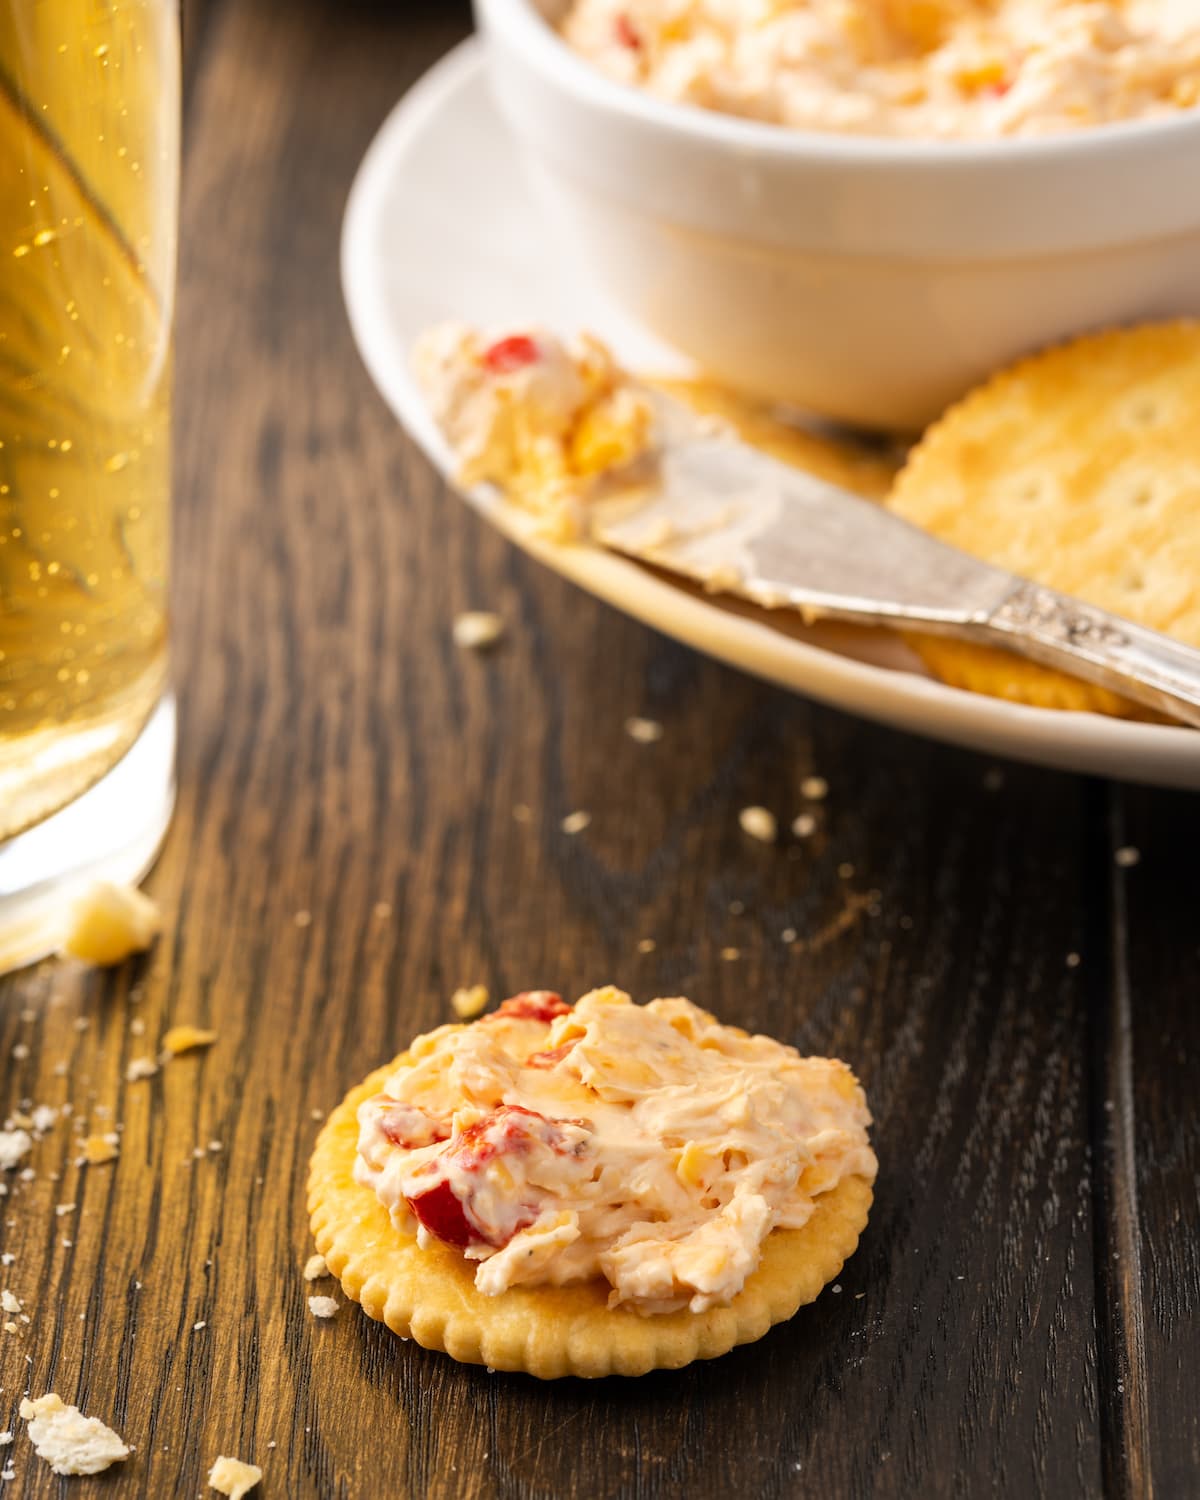 Crackers topped with pimento cheese on a tabletop with a plate of crackers and pimento cheese in the background.